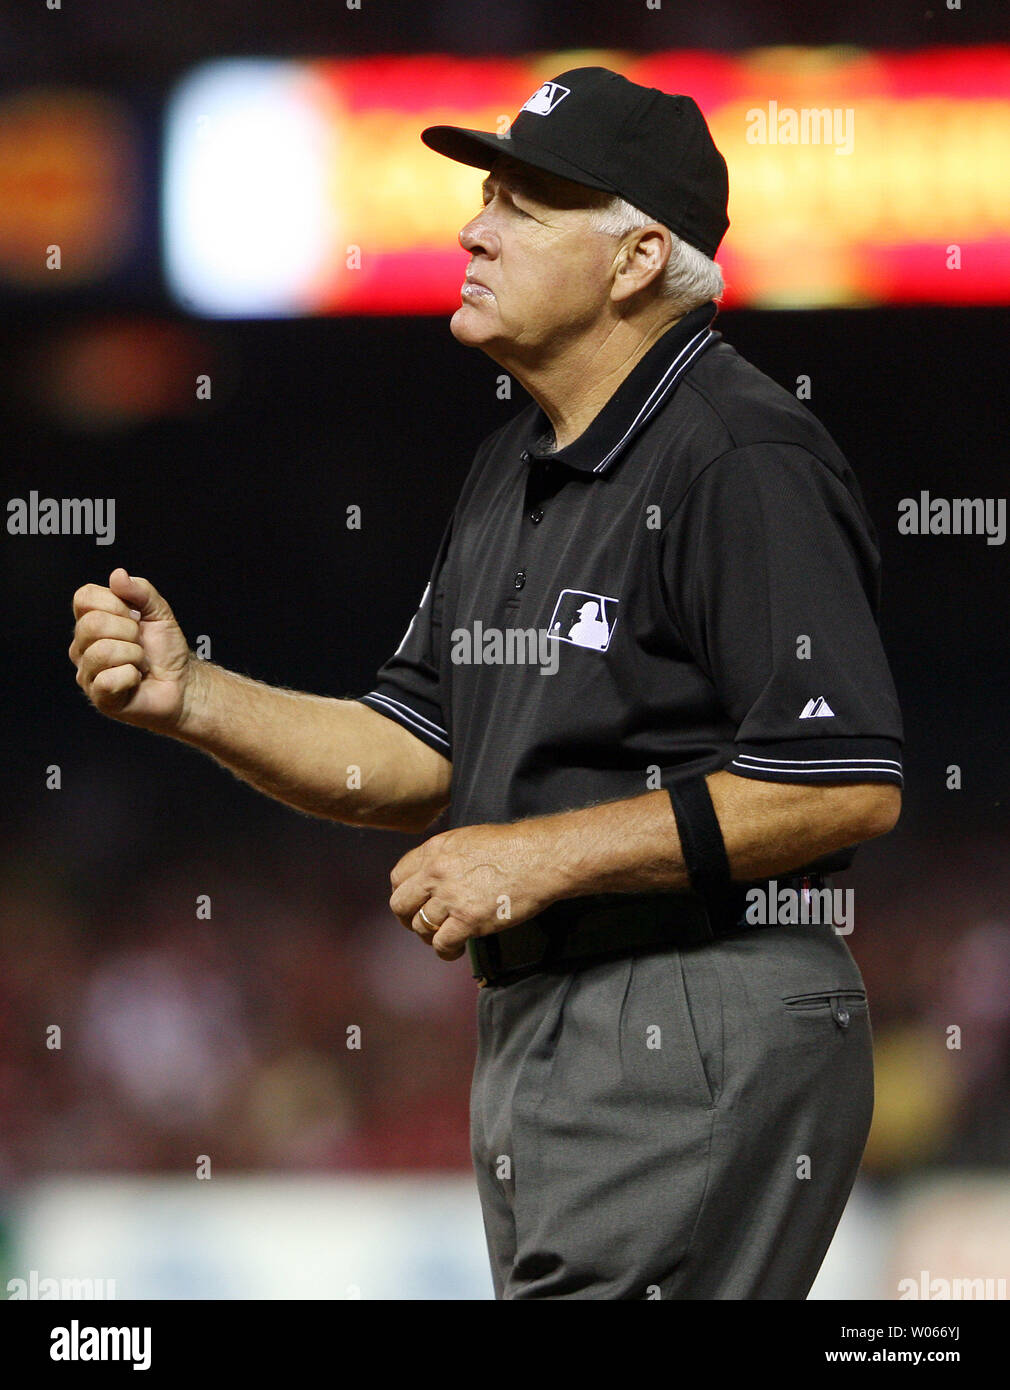 First base umpire Joe Brinkman makes the call on a runner thrown out during a game between the  Cincinnati Reds and the St. Louis Cardinals at Busch Stadium in St. Louis on June 6, 2006. The umpire crew is wearing black armbands as they remember former umpire Eric Gregg who died yesterday at the age of 55 in Philadelphia after a stroke.(UPI Photo/Bill Greenblatt) Stock Photo